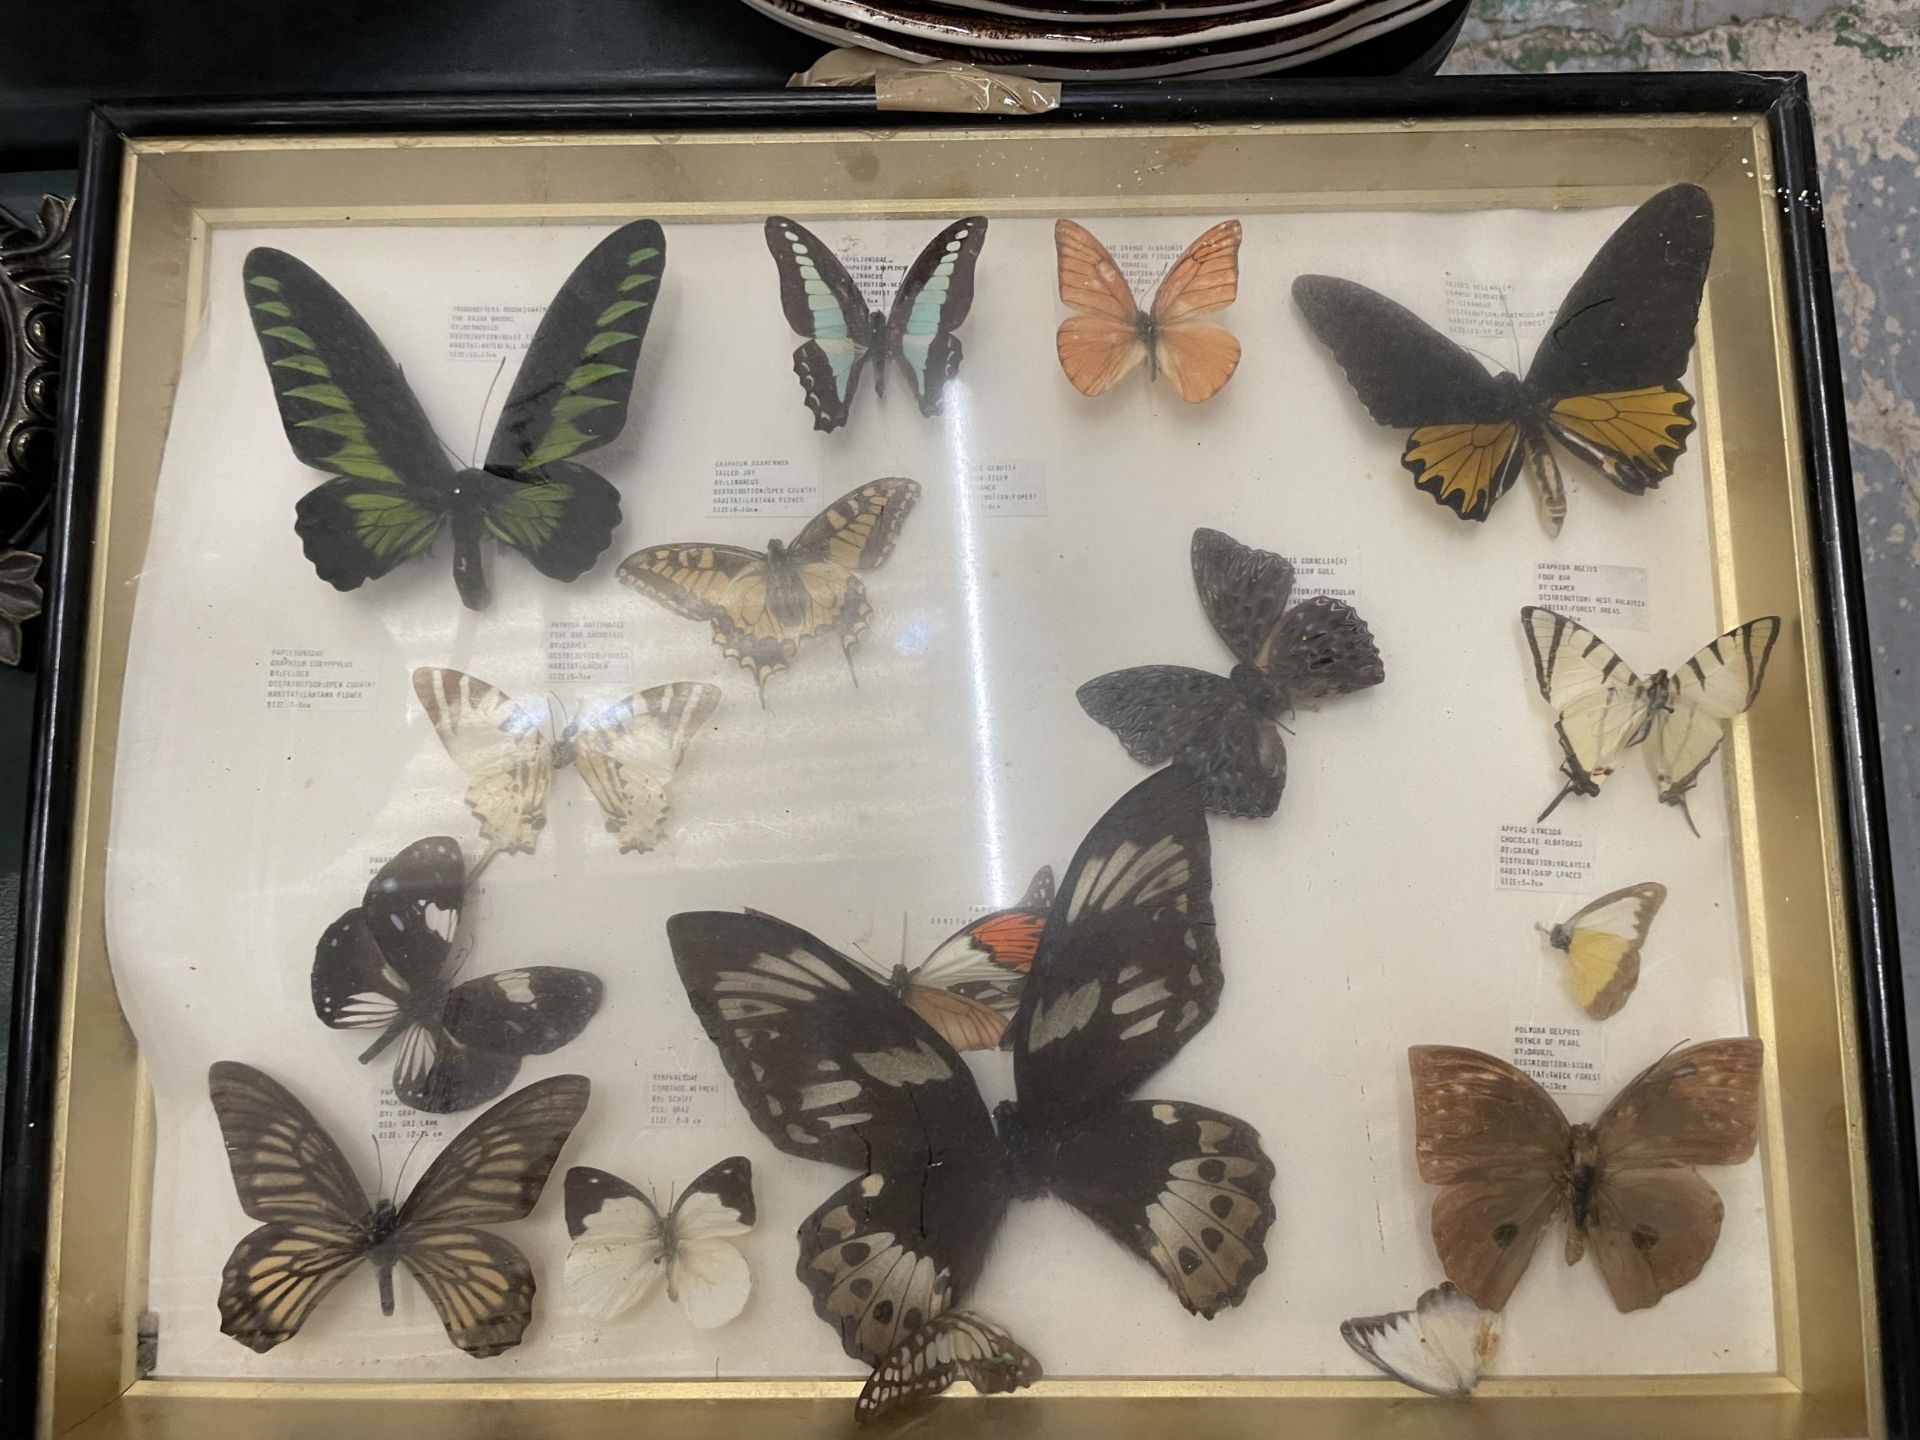 THREE FRAMED MONTAGES CONTAINING BUTTERFLIES - Image 4 of 4